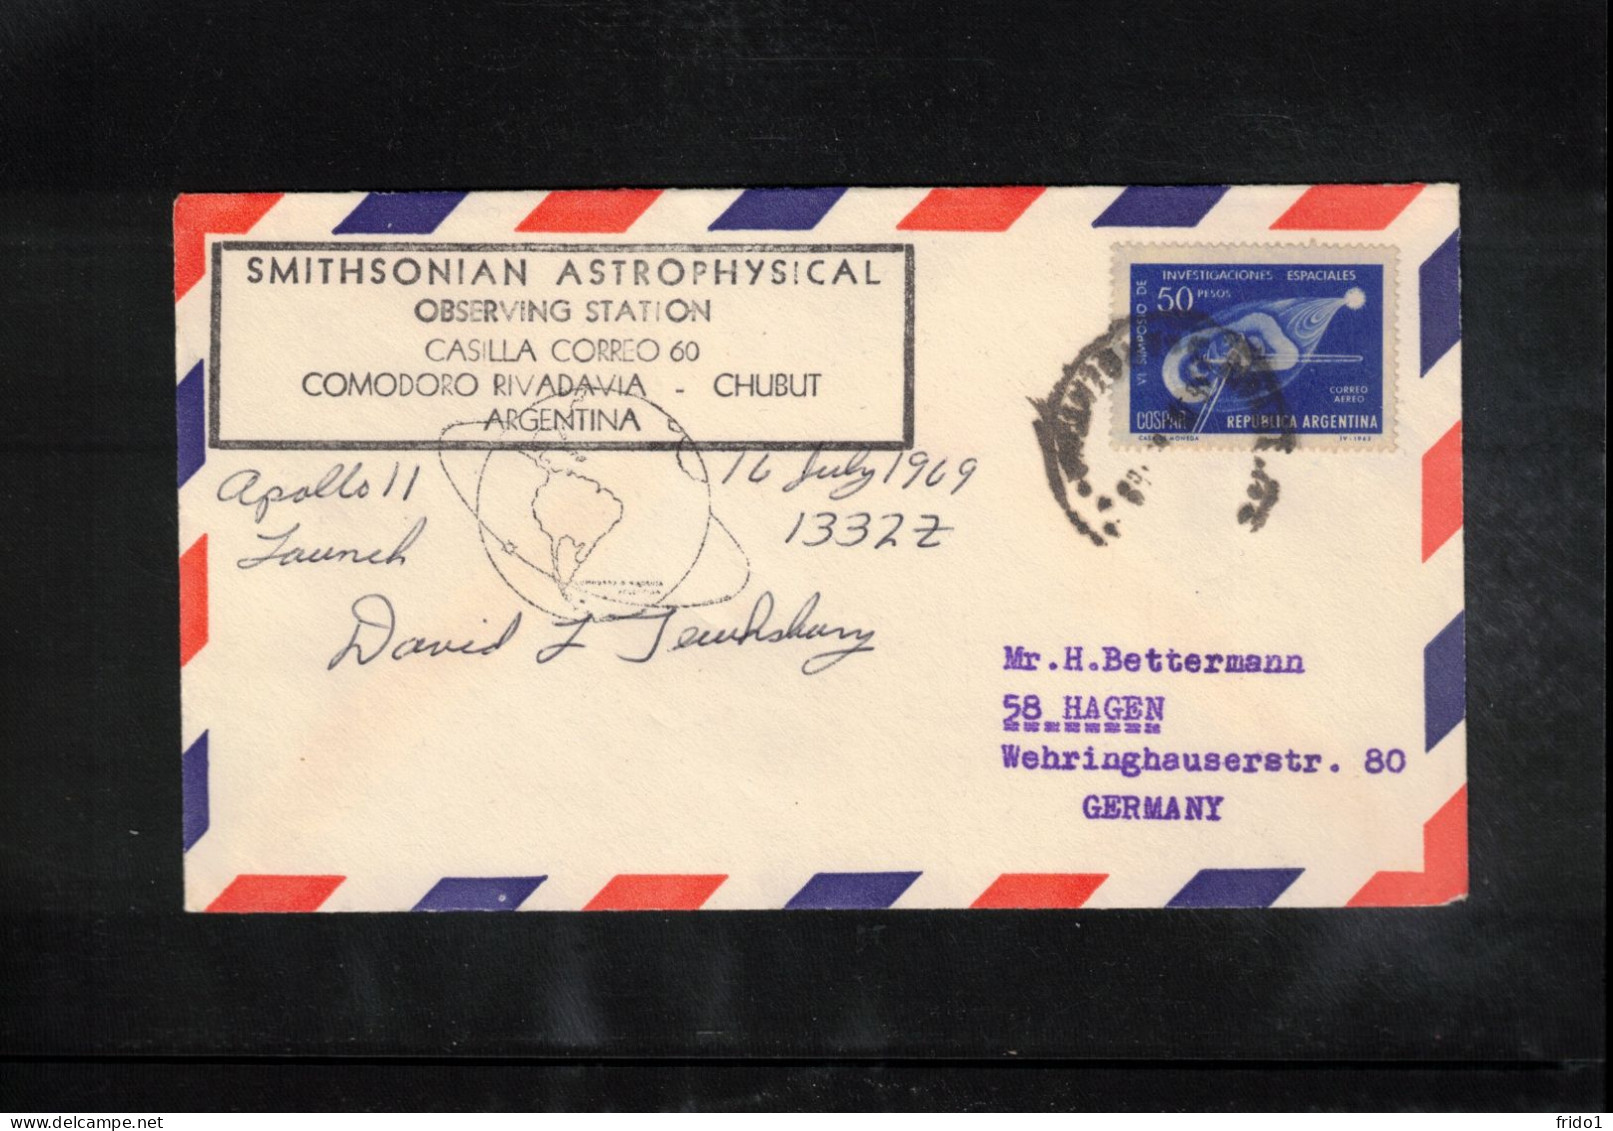 USA 1969 Space / Weltraum - Apollo XI - Smithsonian Astrophysical Observation Station Argentina Interesting Cover - USA